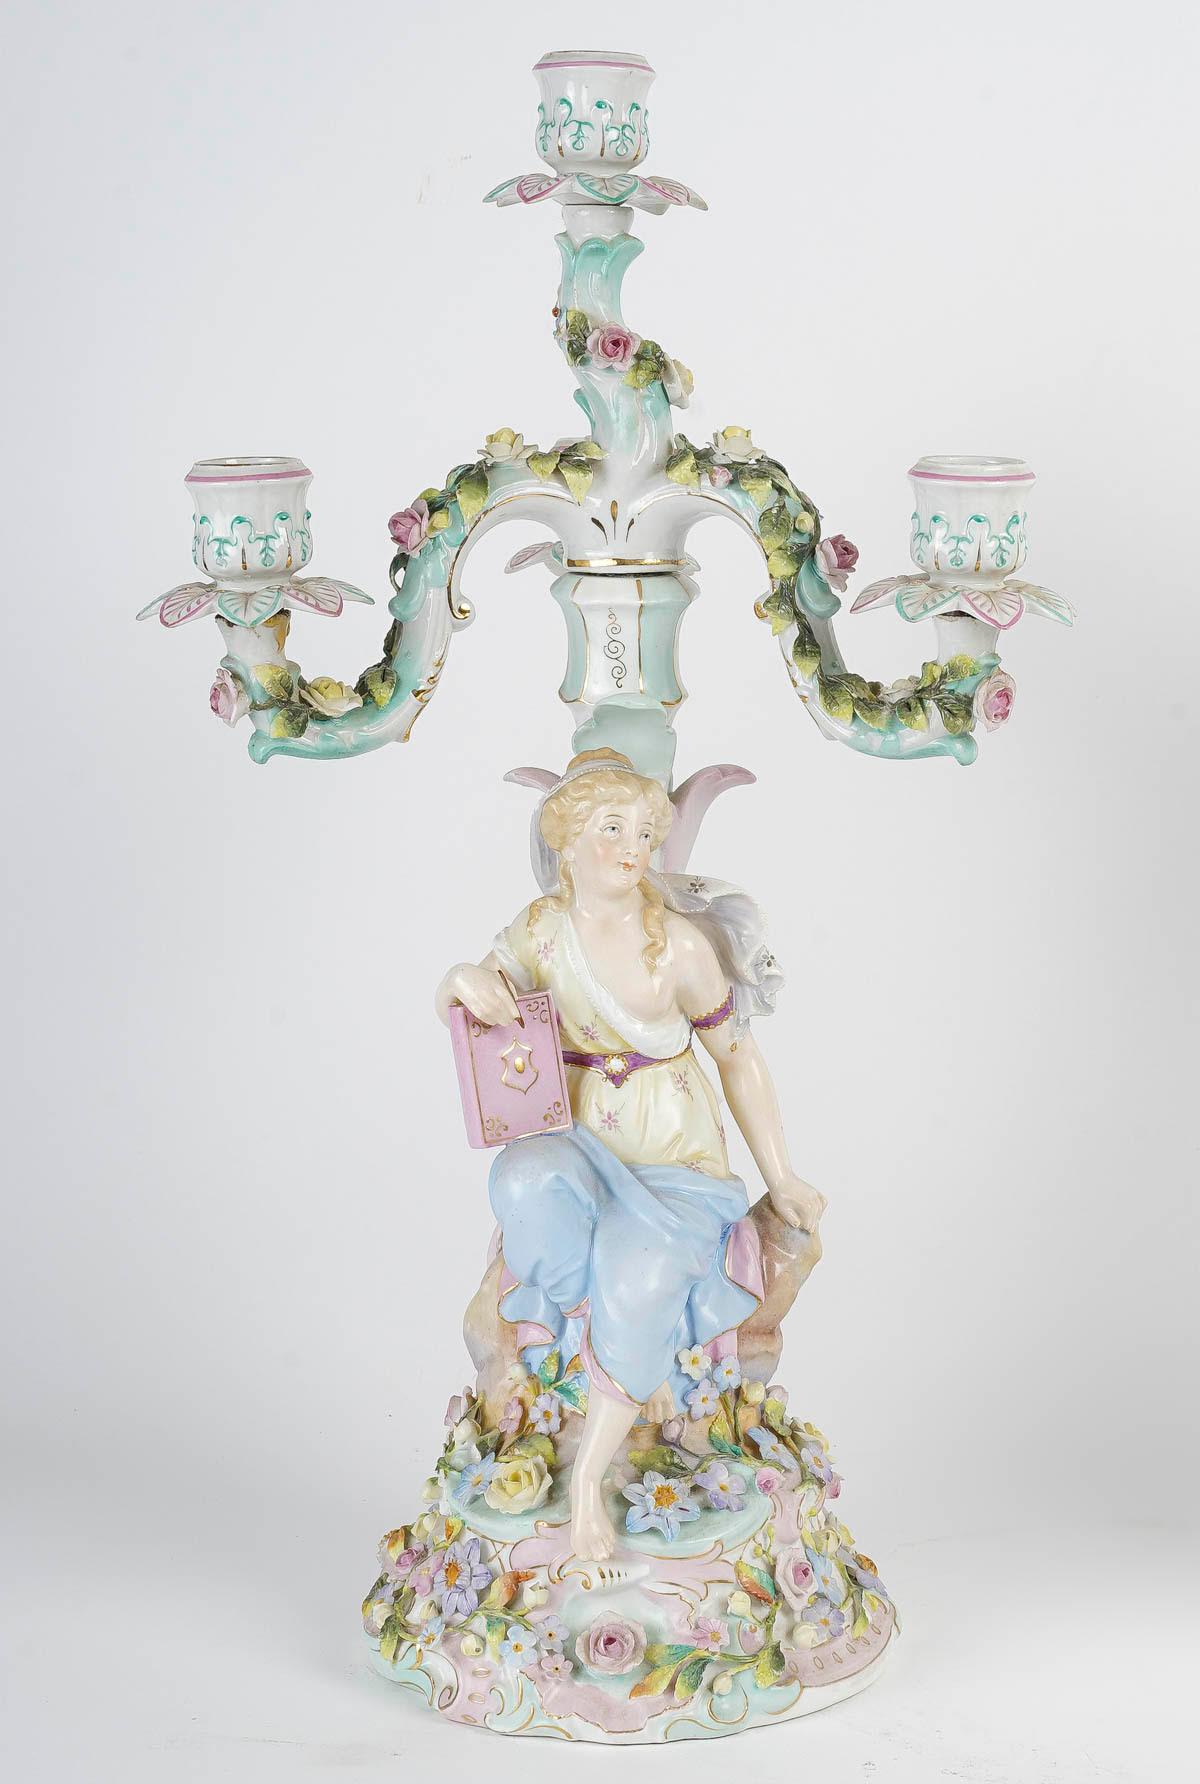 Pair of Porcelain Candelabra in the taste of Meissen, 19th Century.

Pair of porcelain candelabras, 19th century, Napoleon III period, very fine quality.
h:48cm, d: 29cm